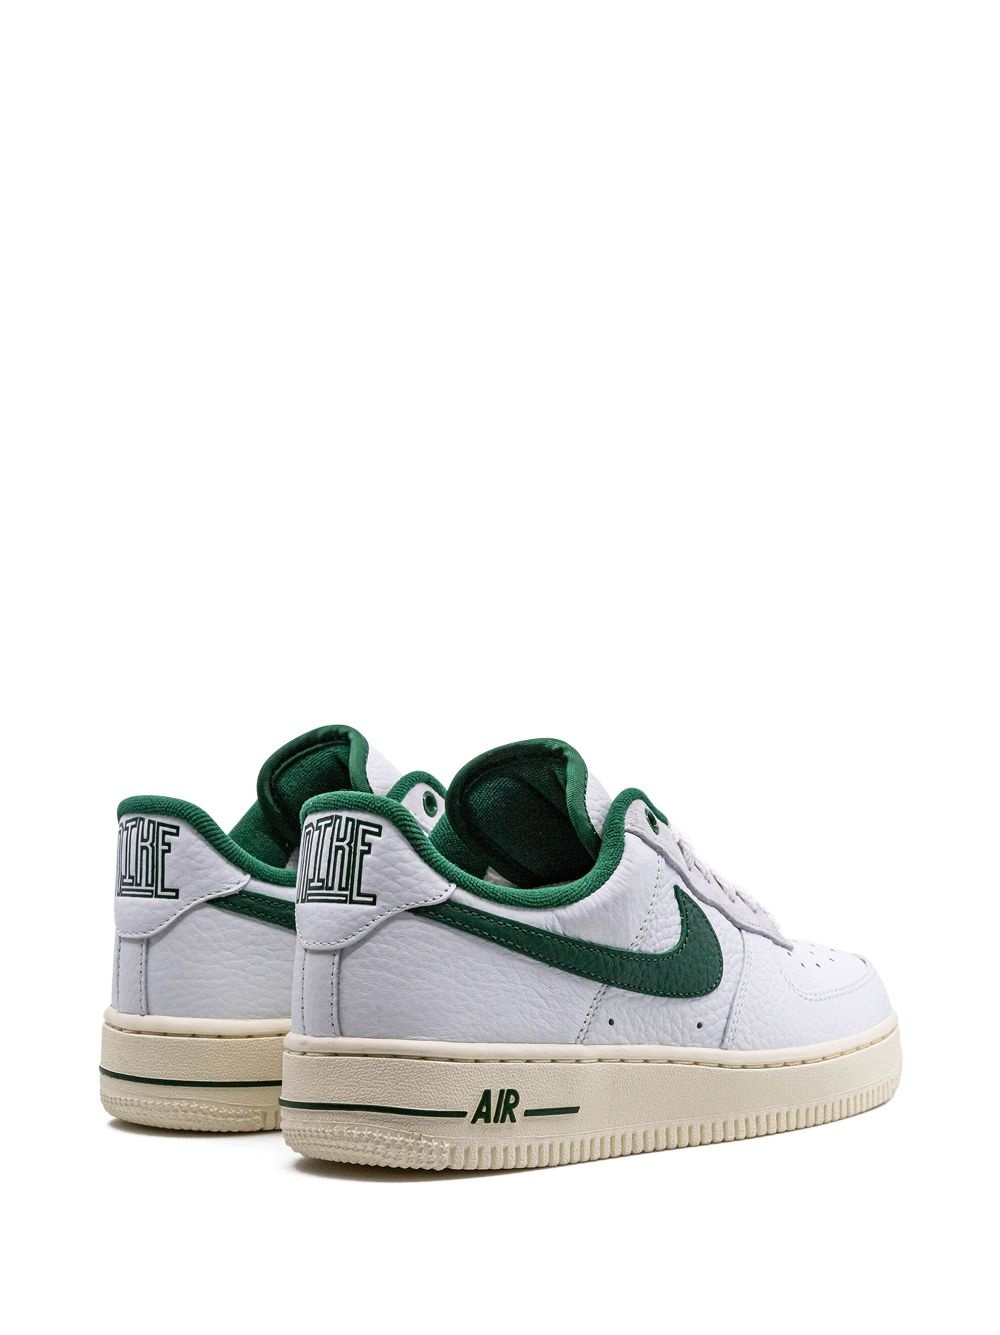 Air Force 1 '07 "Command Force Gorge Green" sneakers - 3